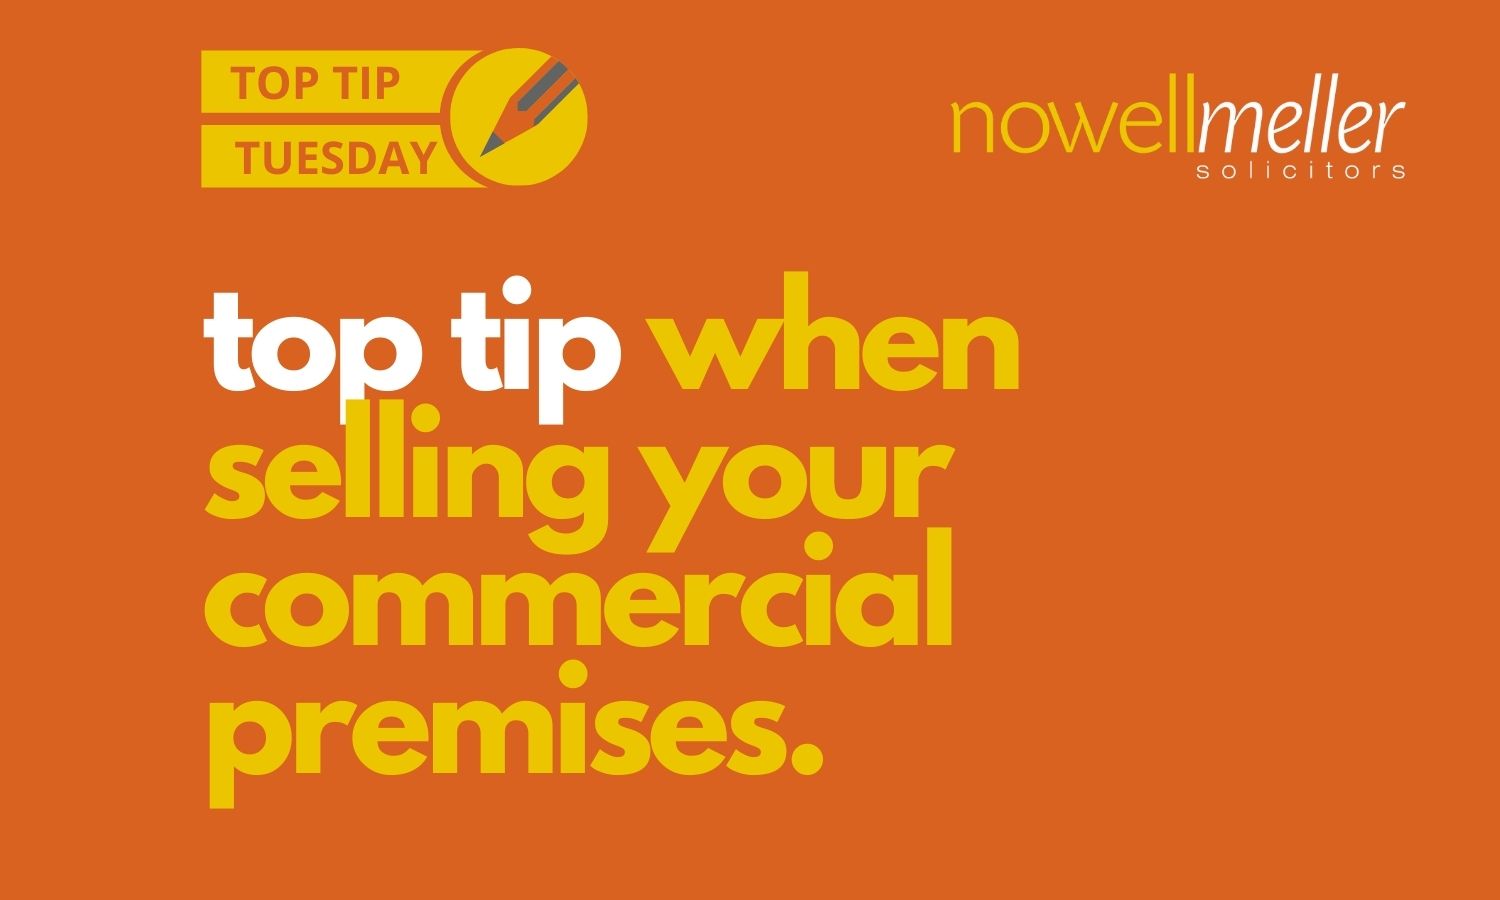 Top Tip Tuesday - Selling Your Commercial Premises